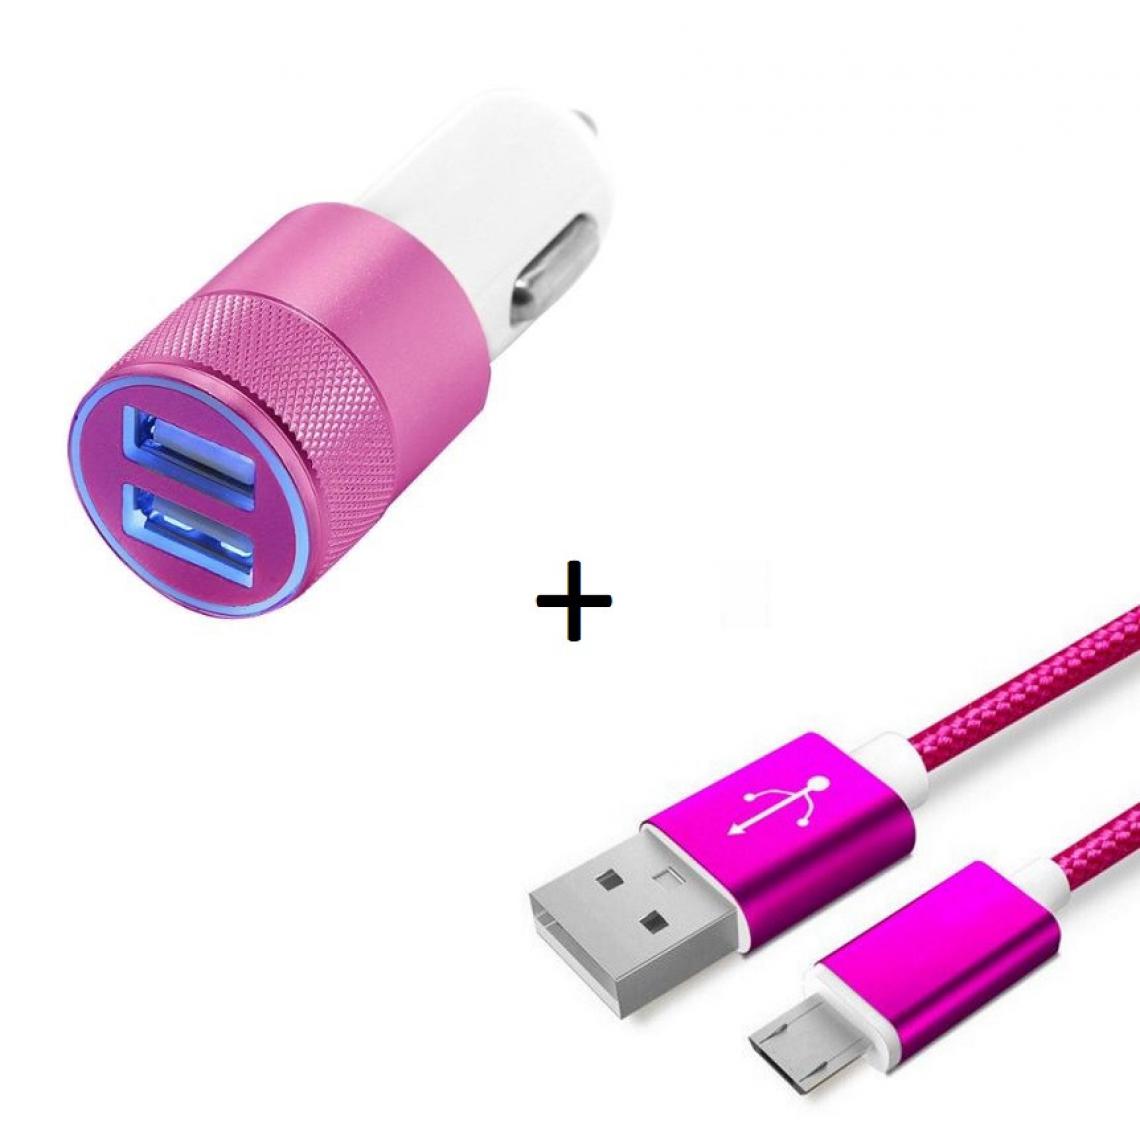 Shot - Pack Chargeur Voiture pour WIKO View 2 Plus Smartphone Micro USB (Cable Metal Nylon + Double Adaptateur Allume Cigare) (ROSE) - Chargeur Voiture 12V